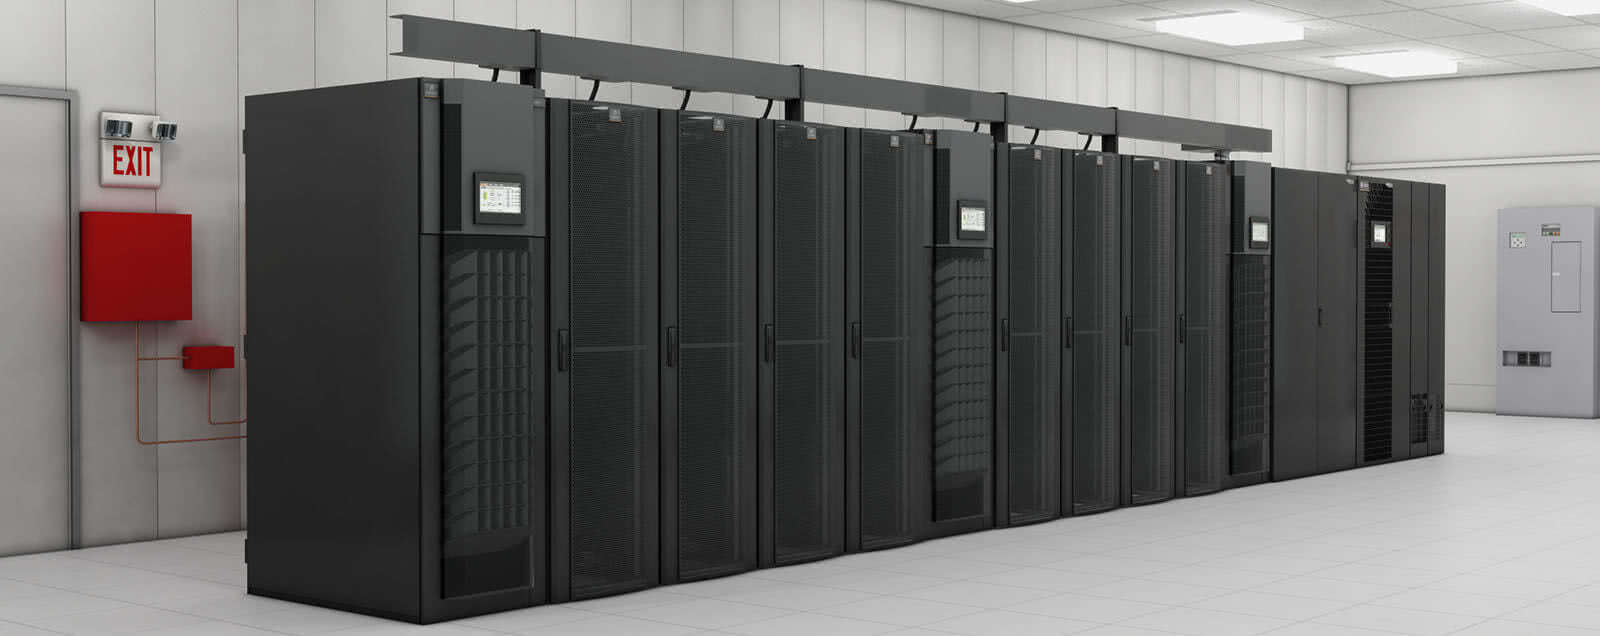 Liebert thermal & power systems for edge data centers